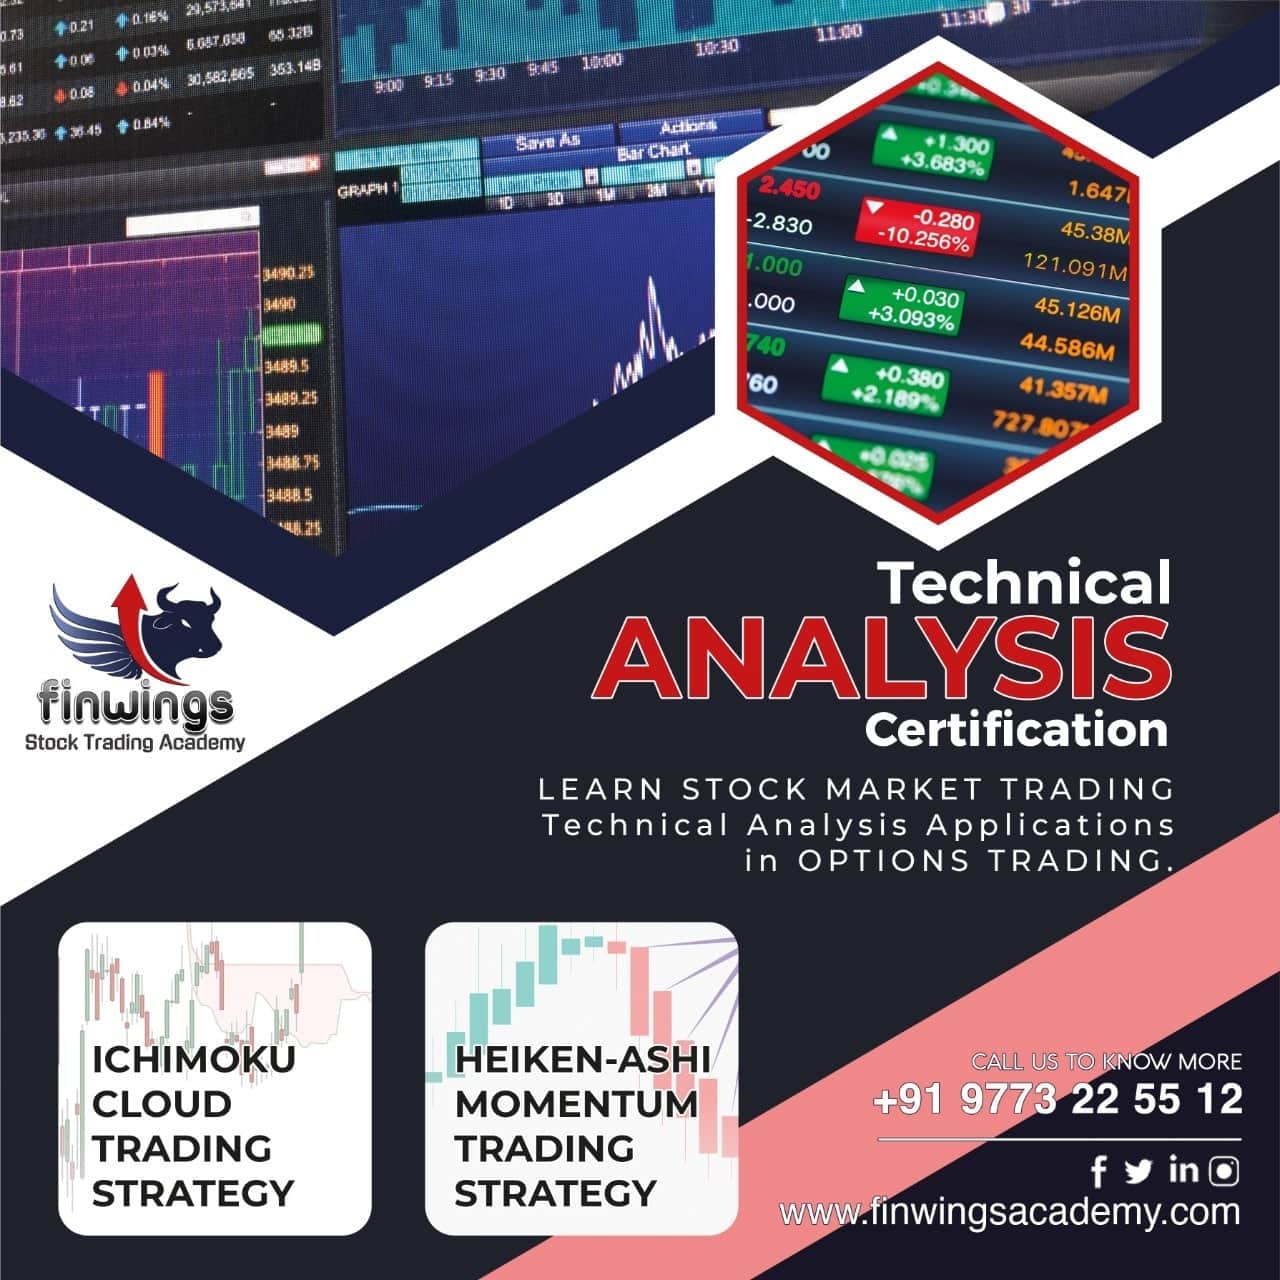 Learn Stock Market Trading – Technical Analysis application in Options Trading